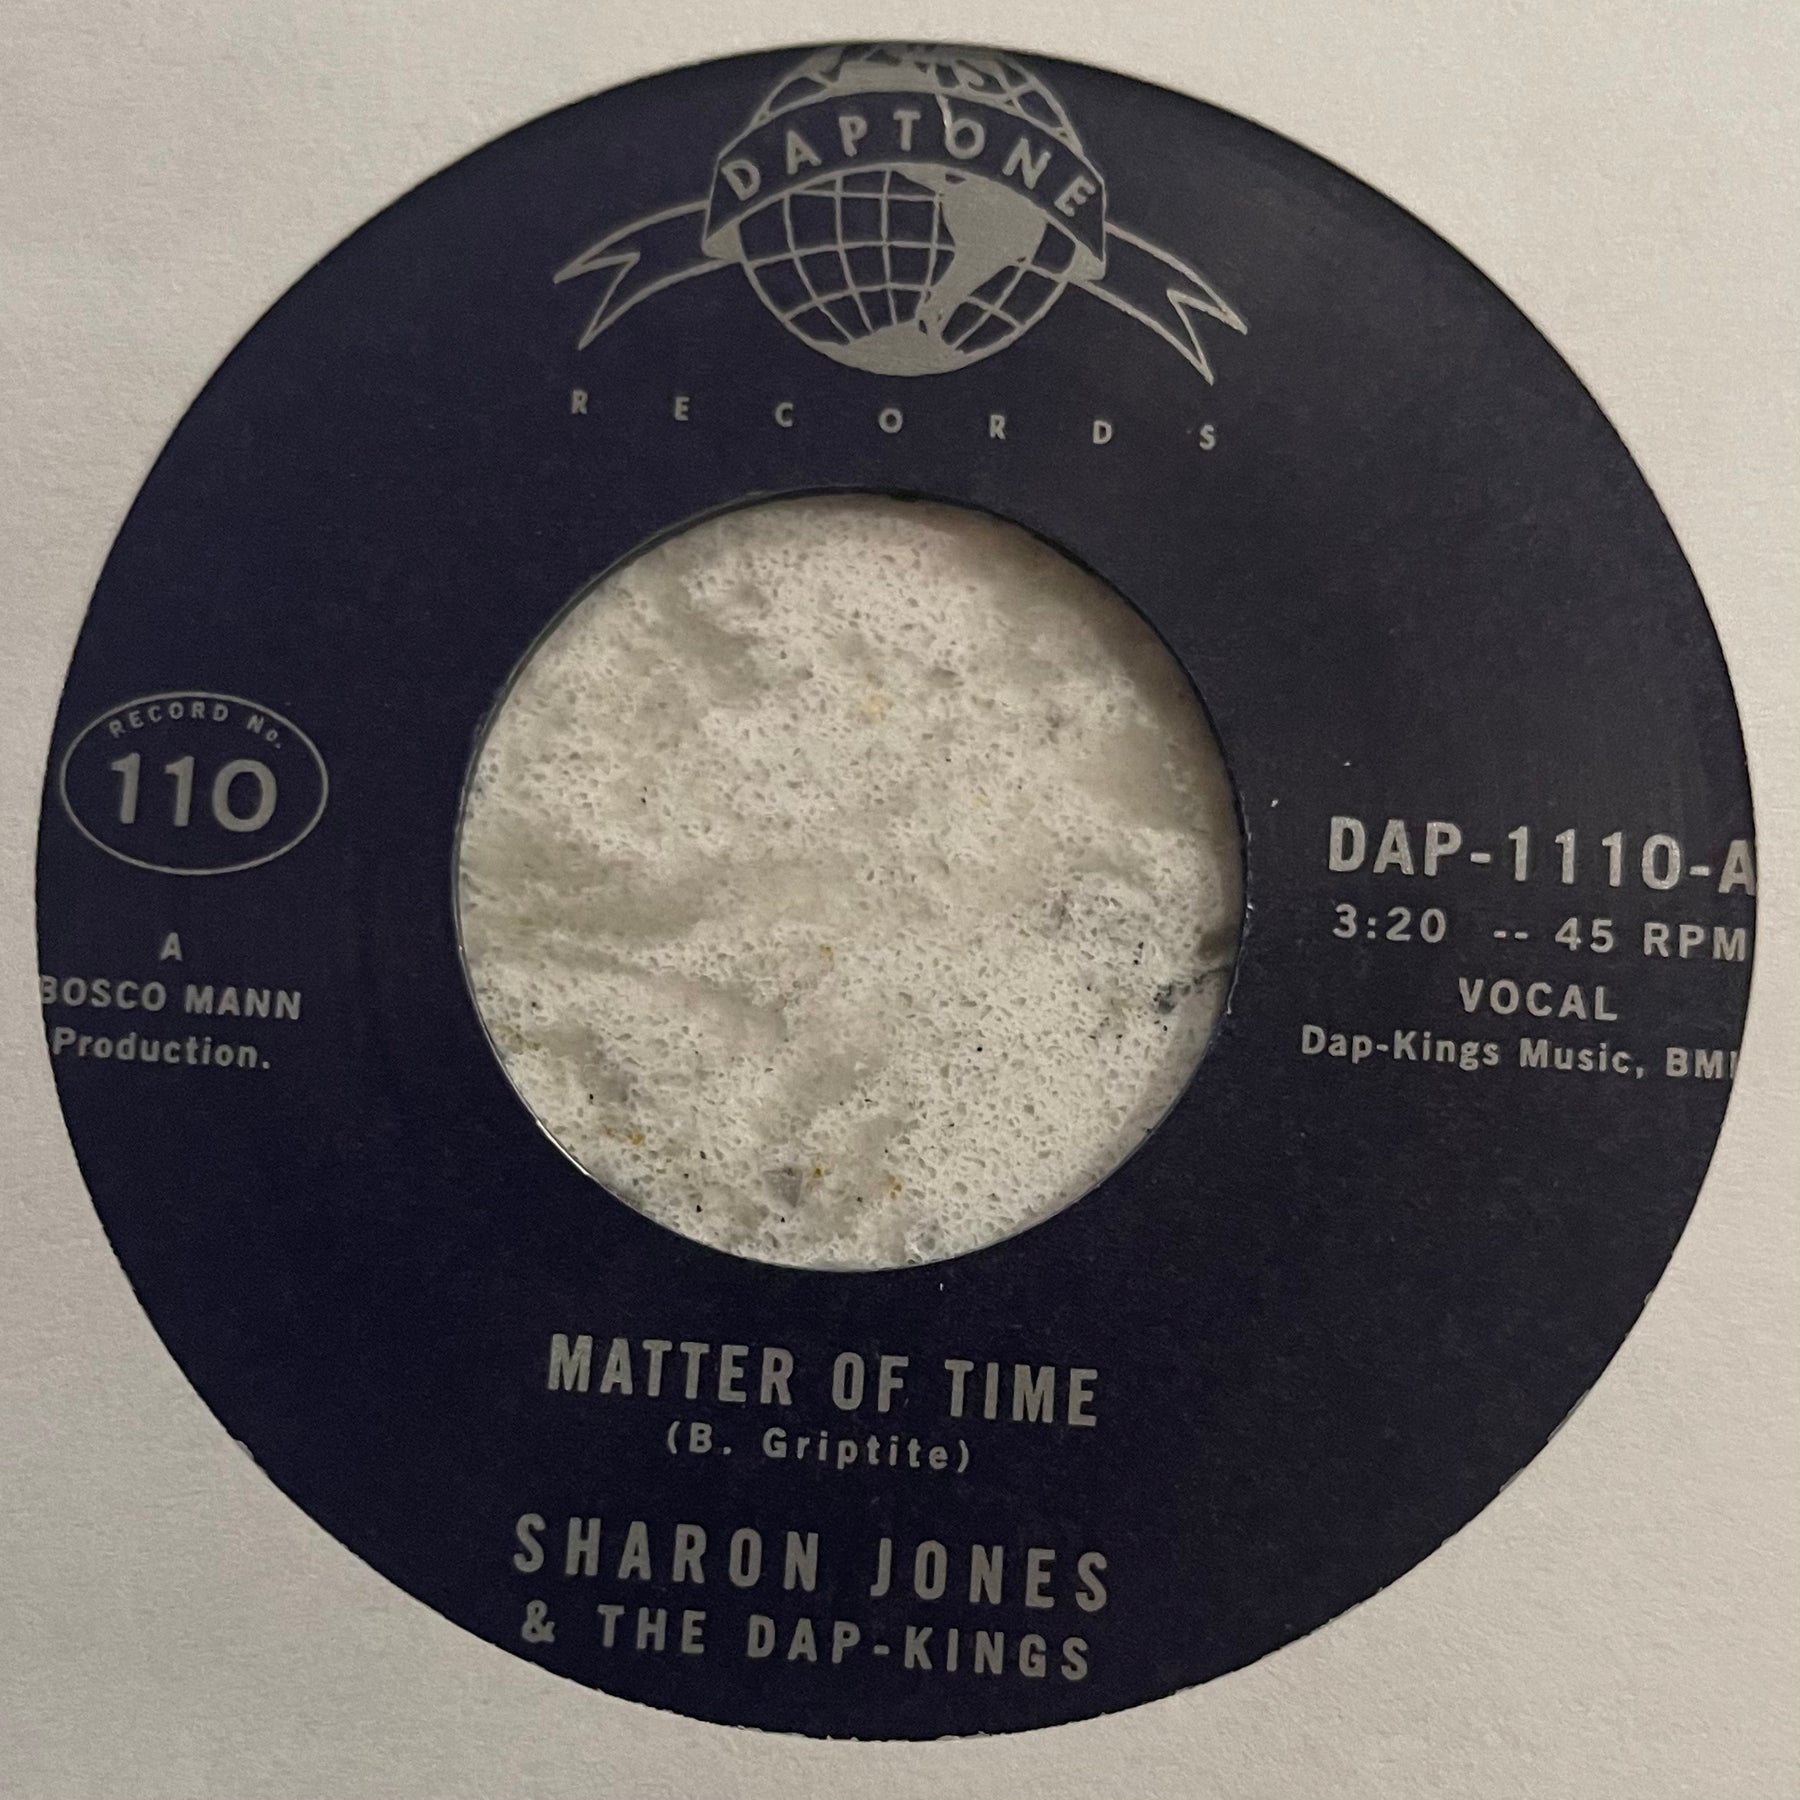 Sharon Jones and The Dap-Kings - Matter of Time b/w When I Saw Your Face